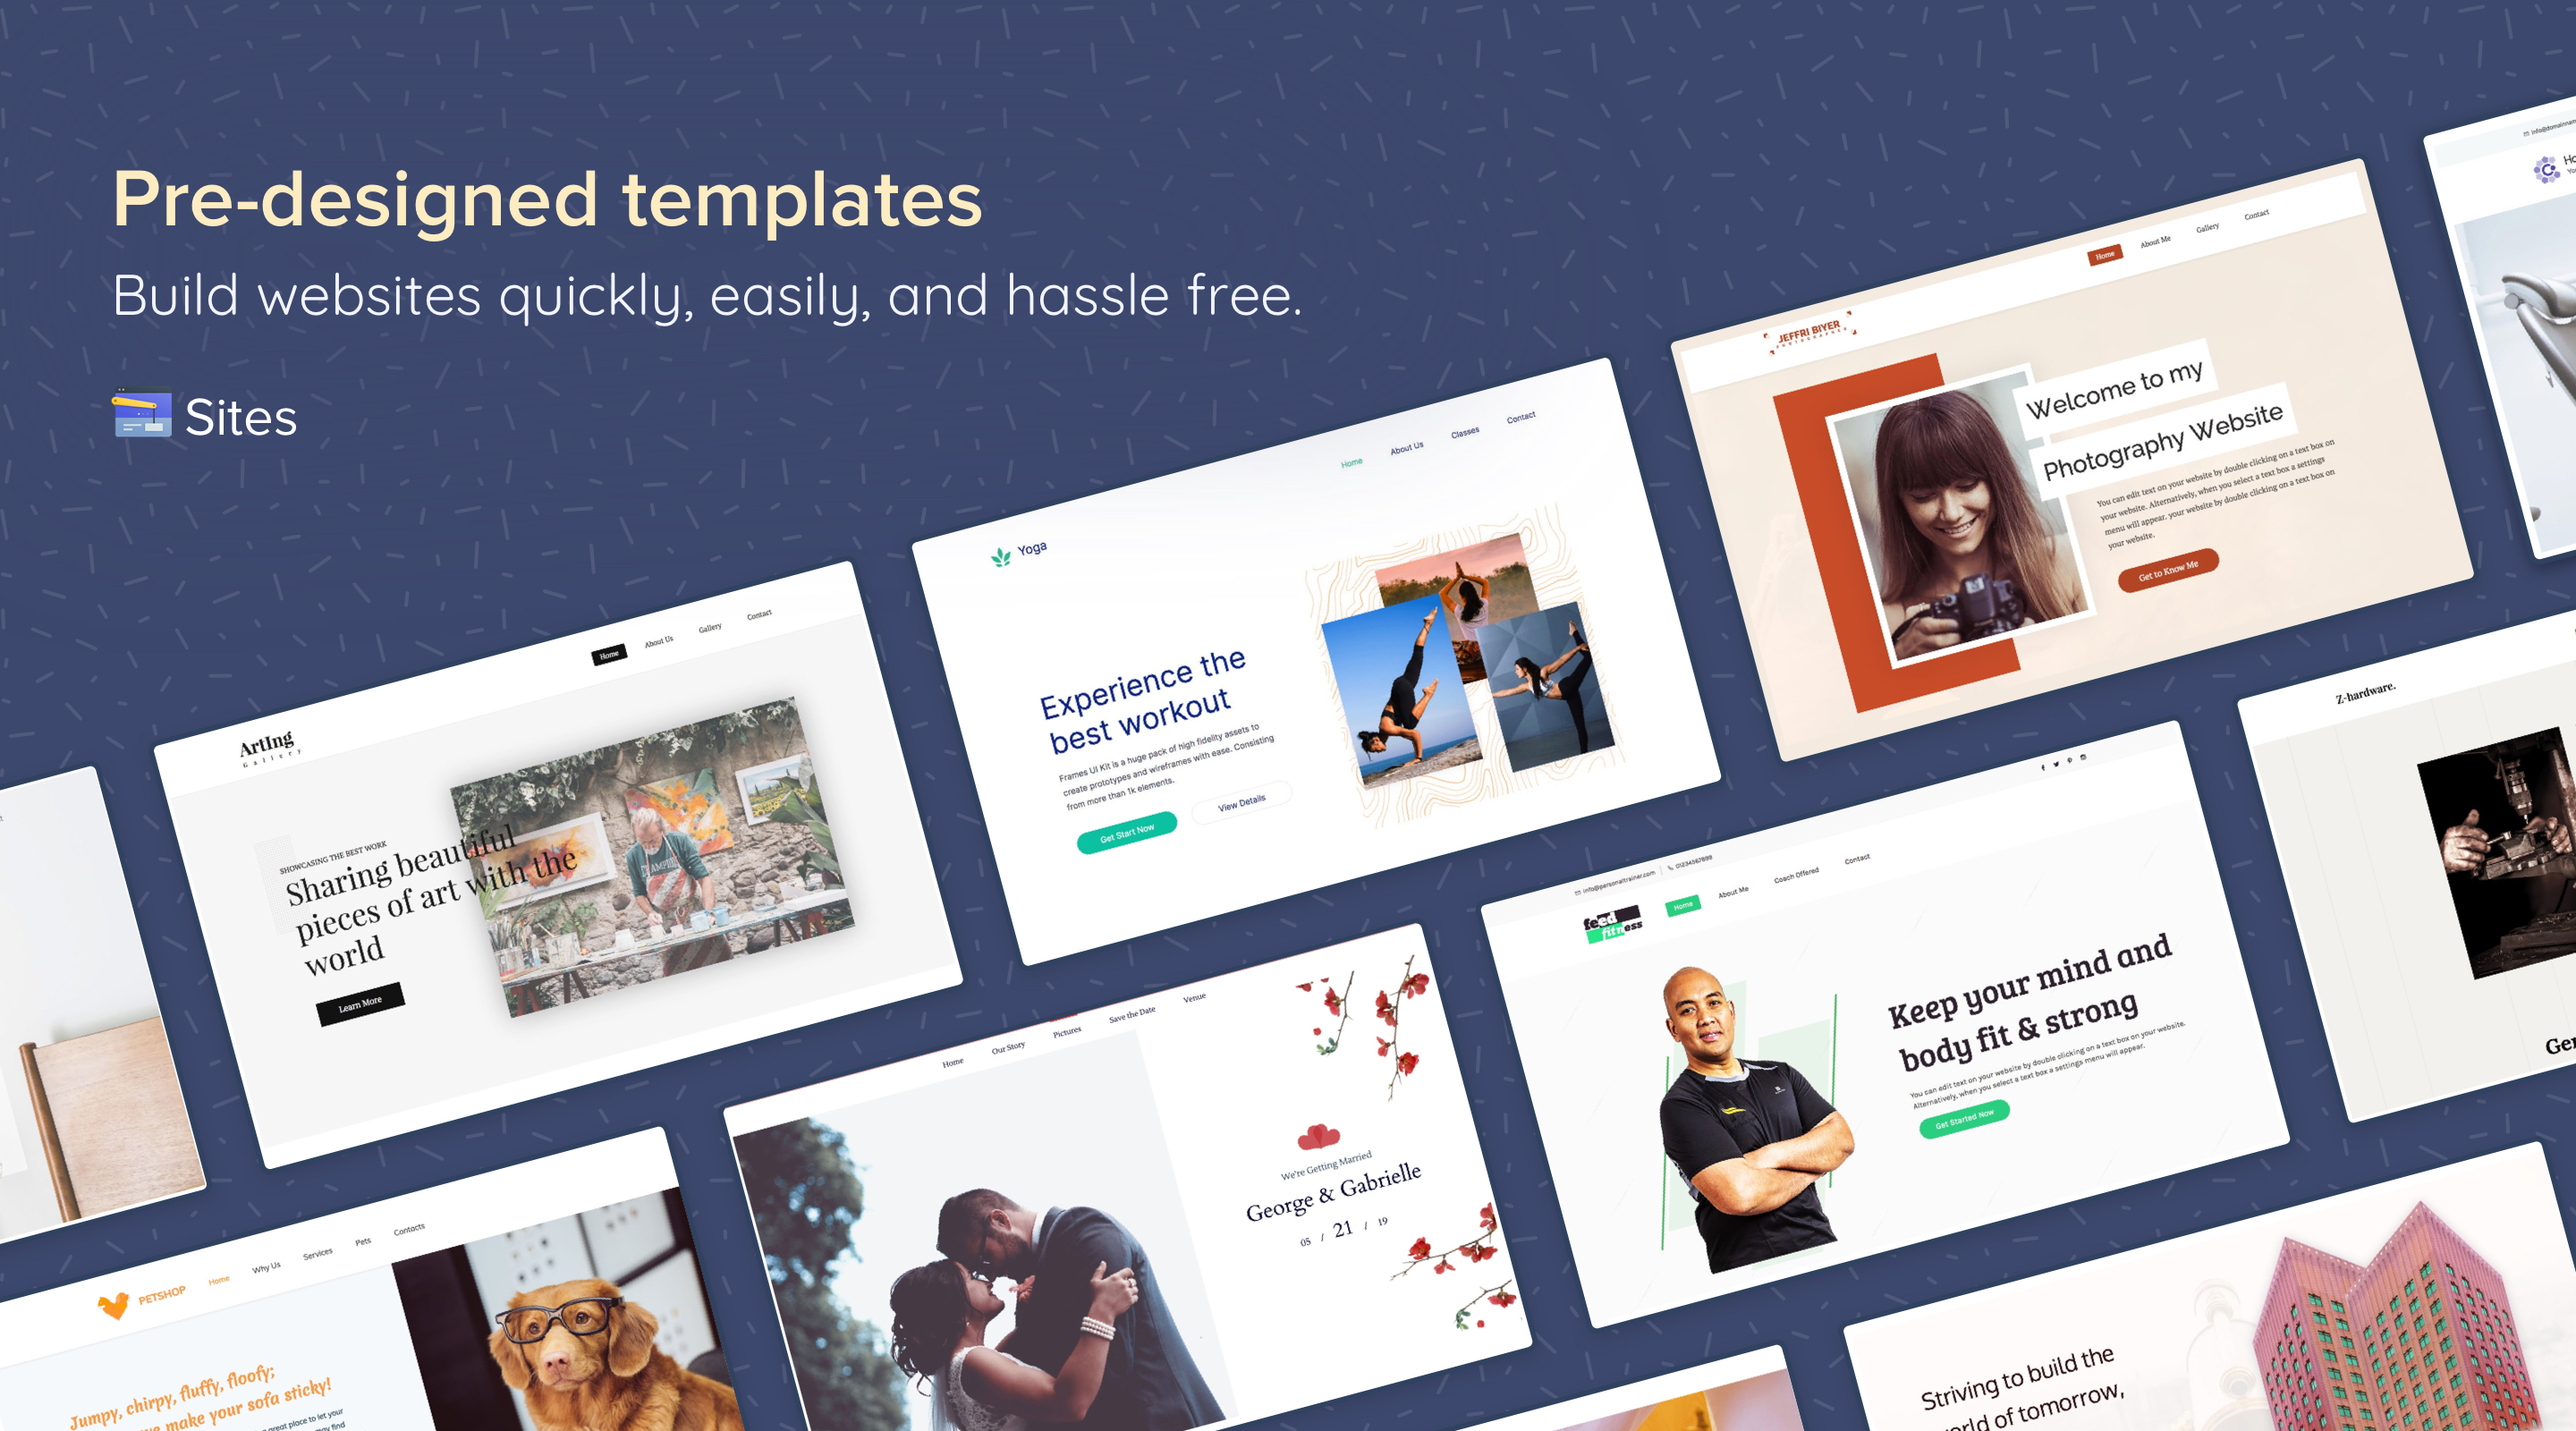 Professionally designed templates, new from Zoho Sites